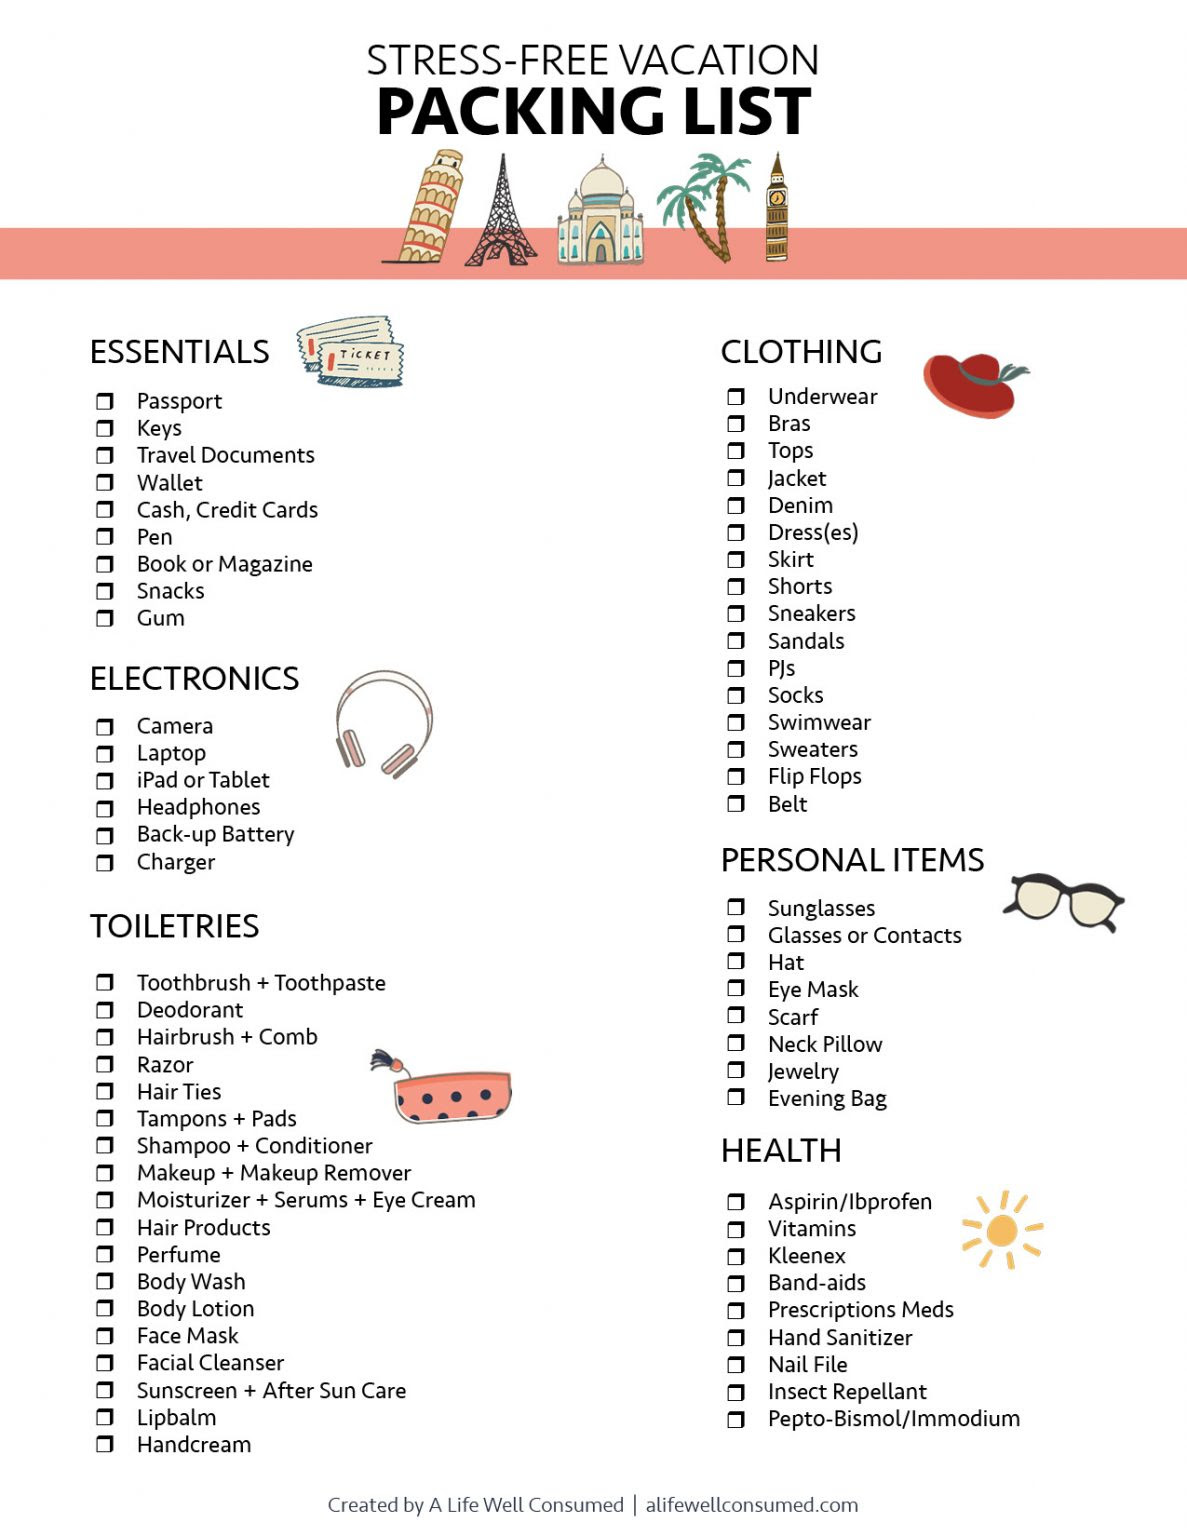 The Ultimate Road Trip Packing List - test